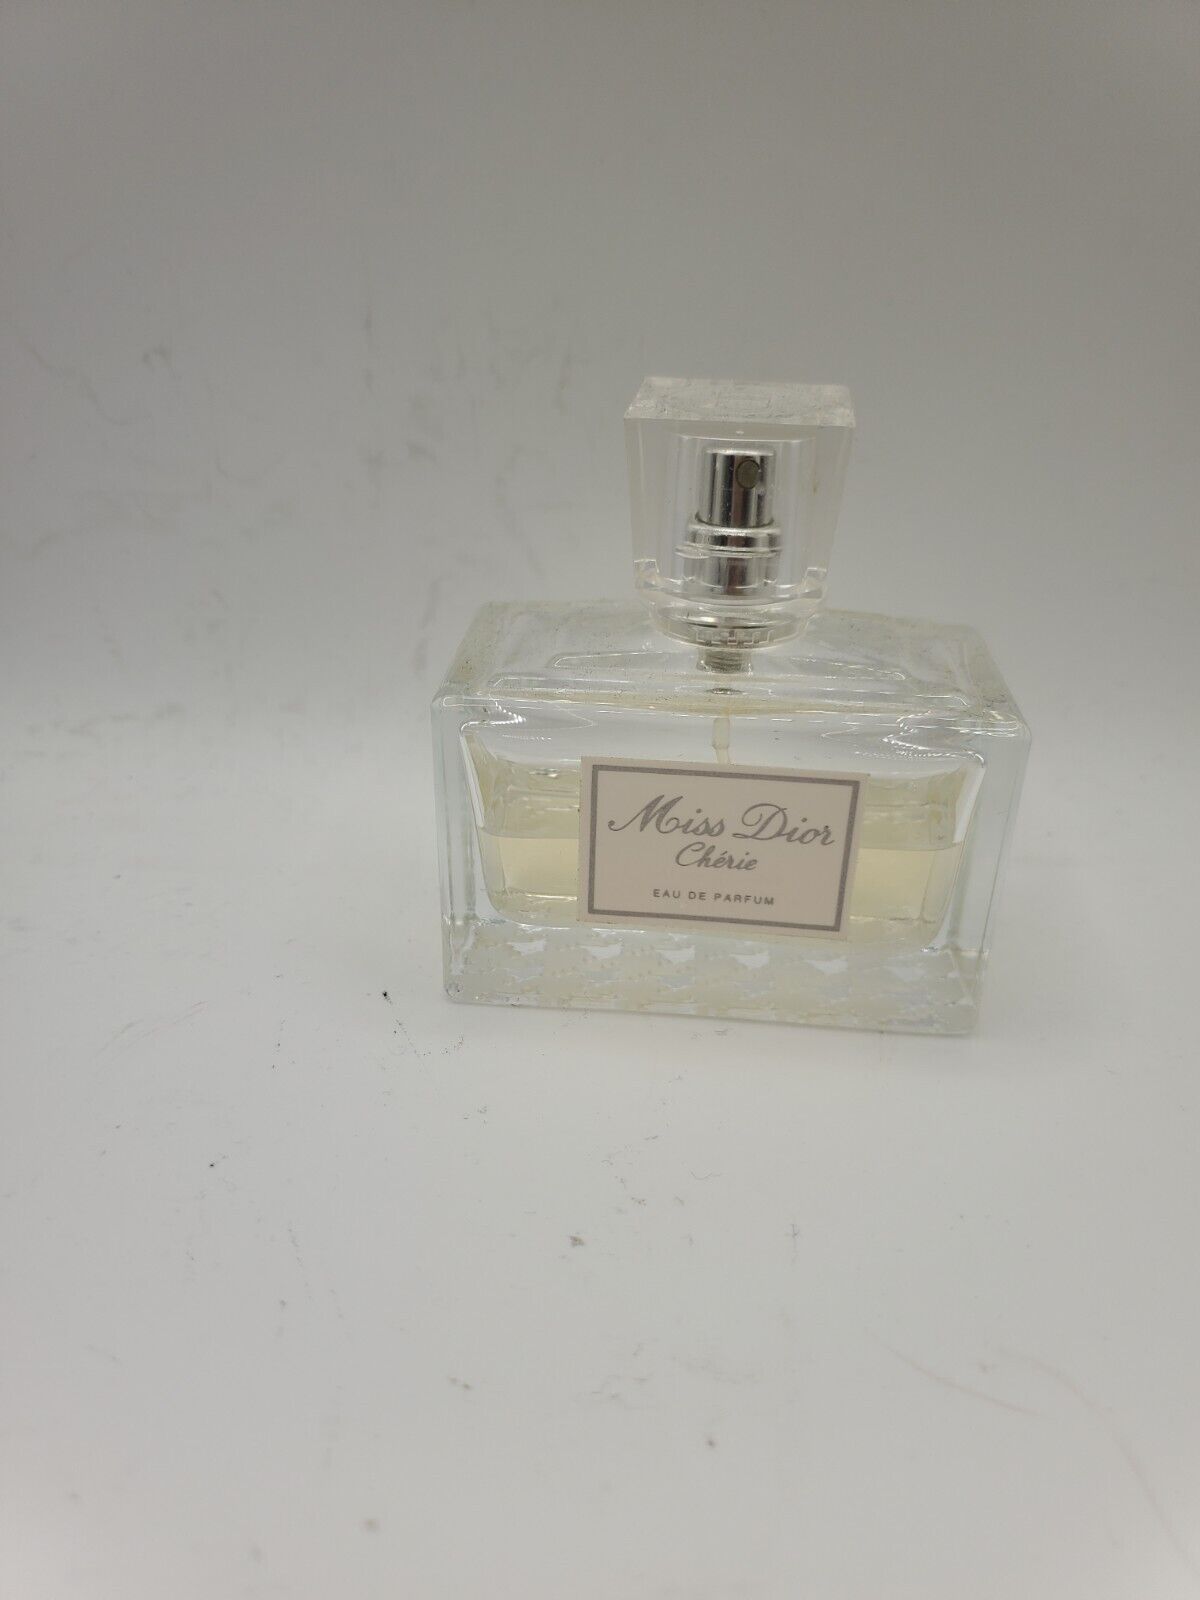 Miss Dior Cherie by Christian Dior 1.7oz EDP for Women No Box - 50% Full